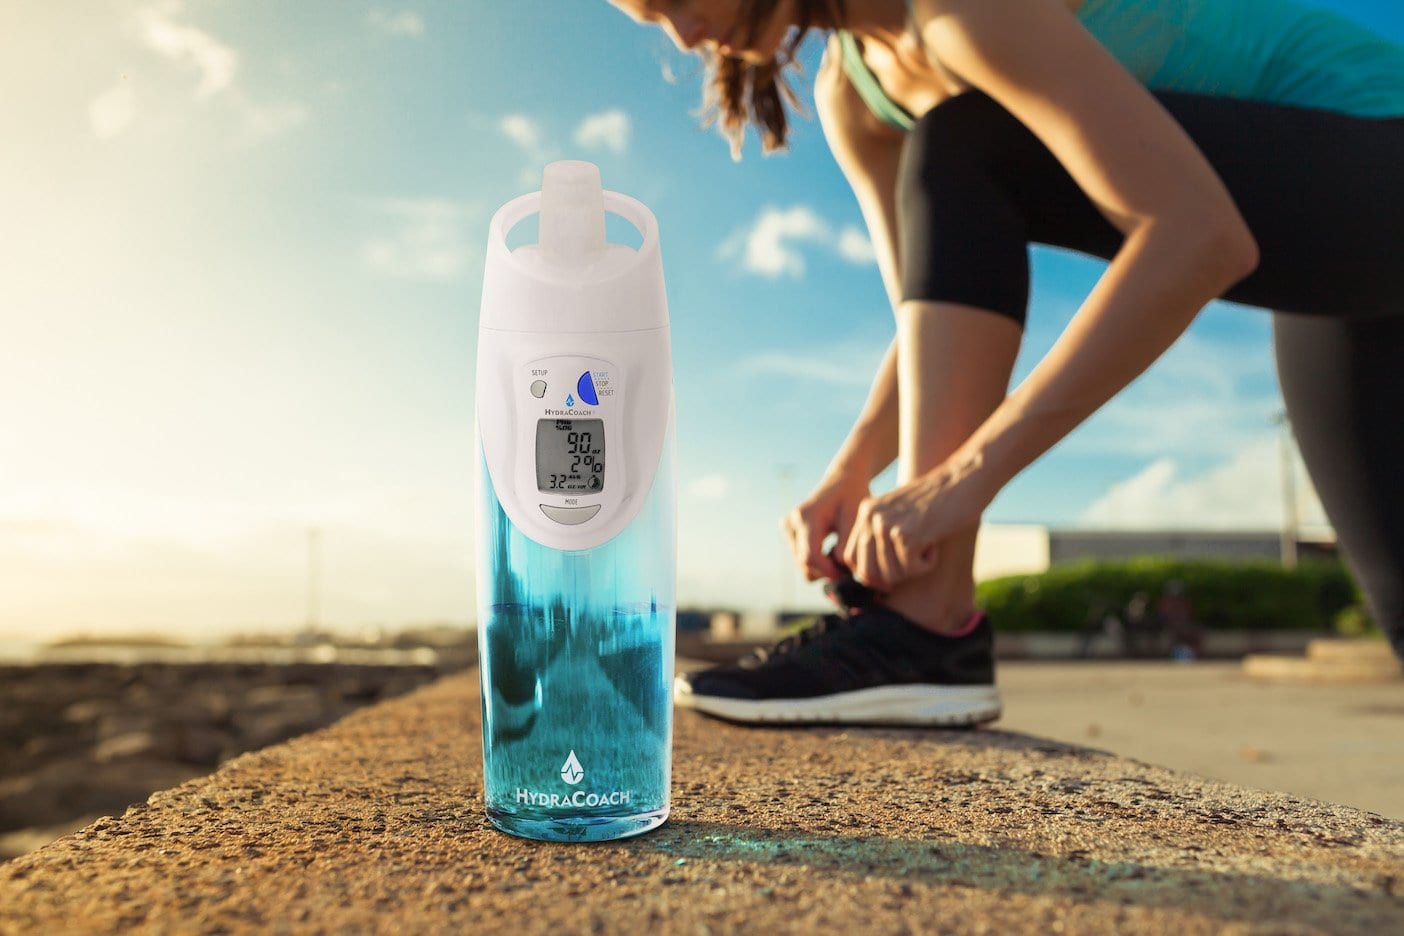 Loving this water bottle that visually reminds you when to drink